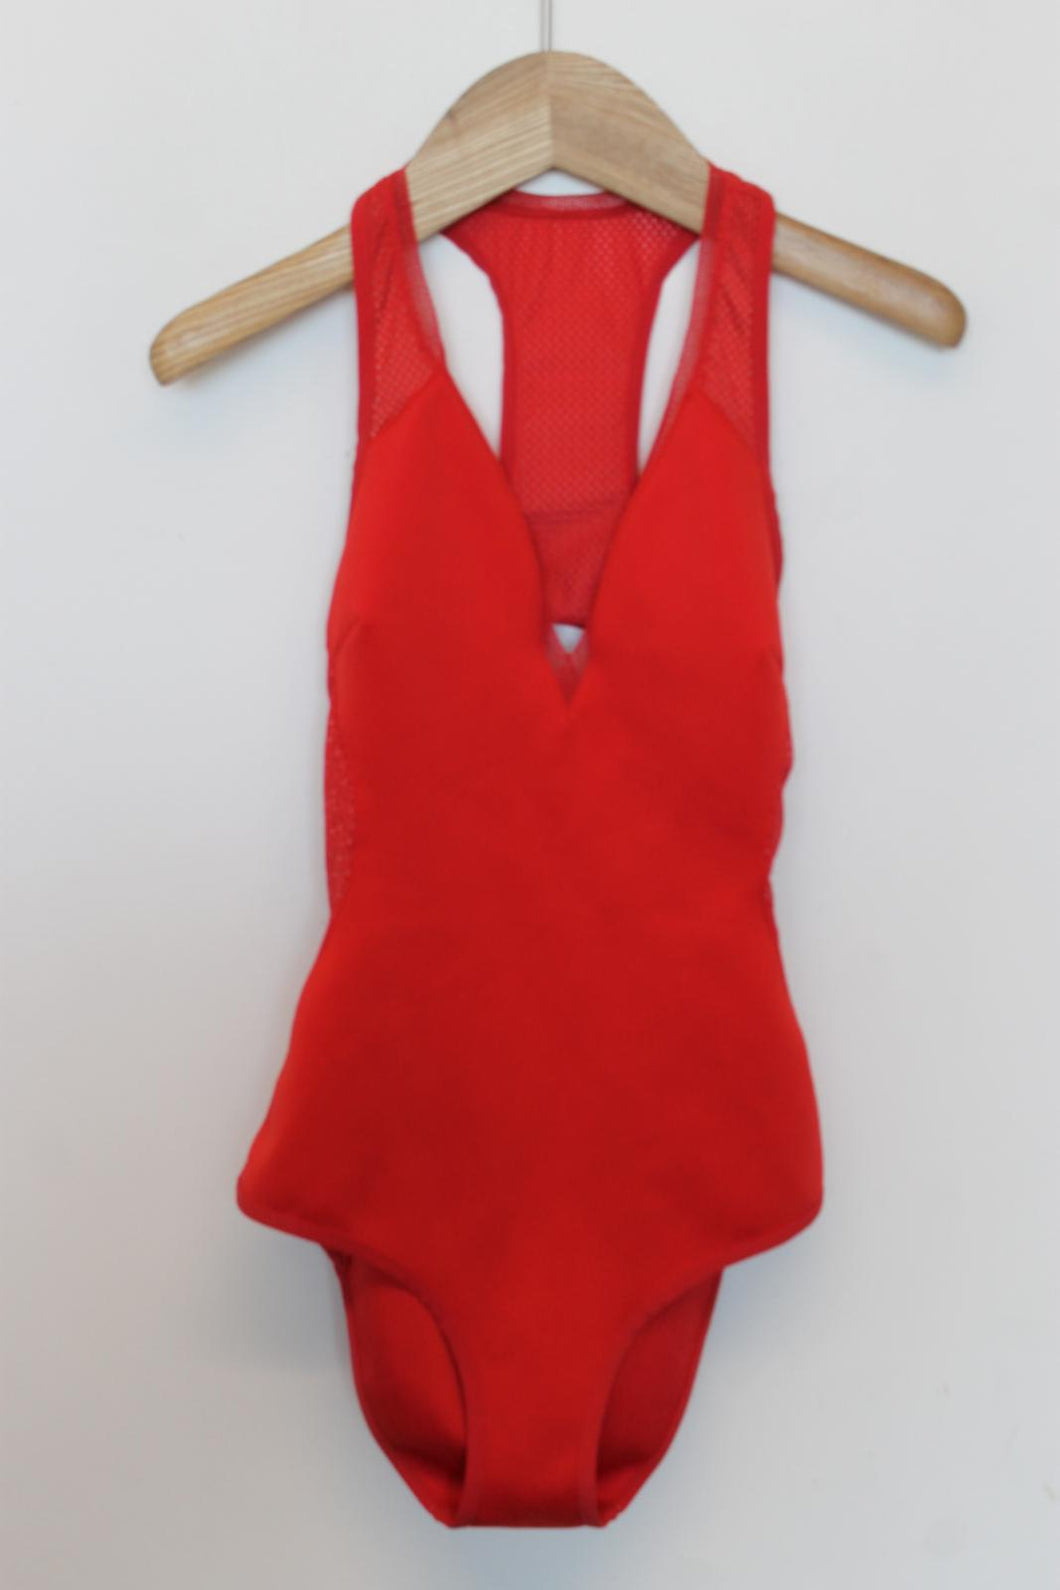 STELLA MCCARTNEY Ladies Red Plunging Neck Open Back One-Piece Swimsuit M